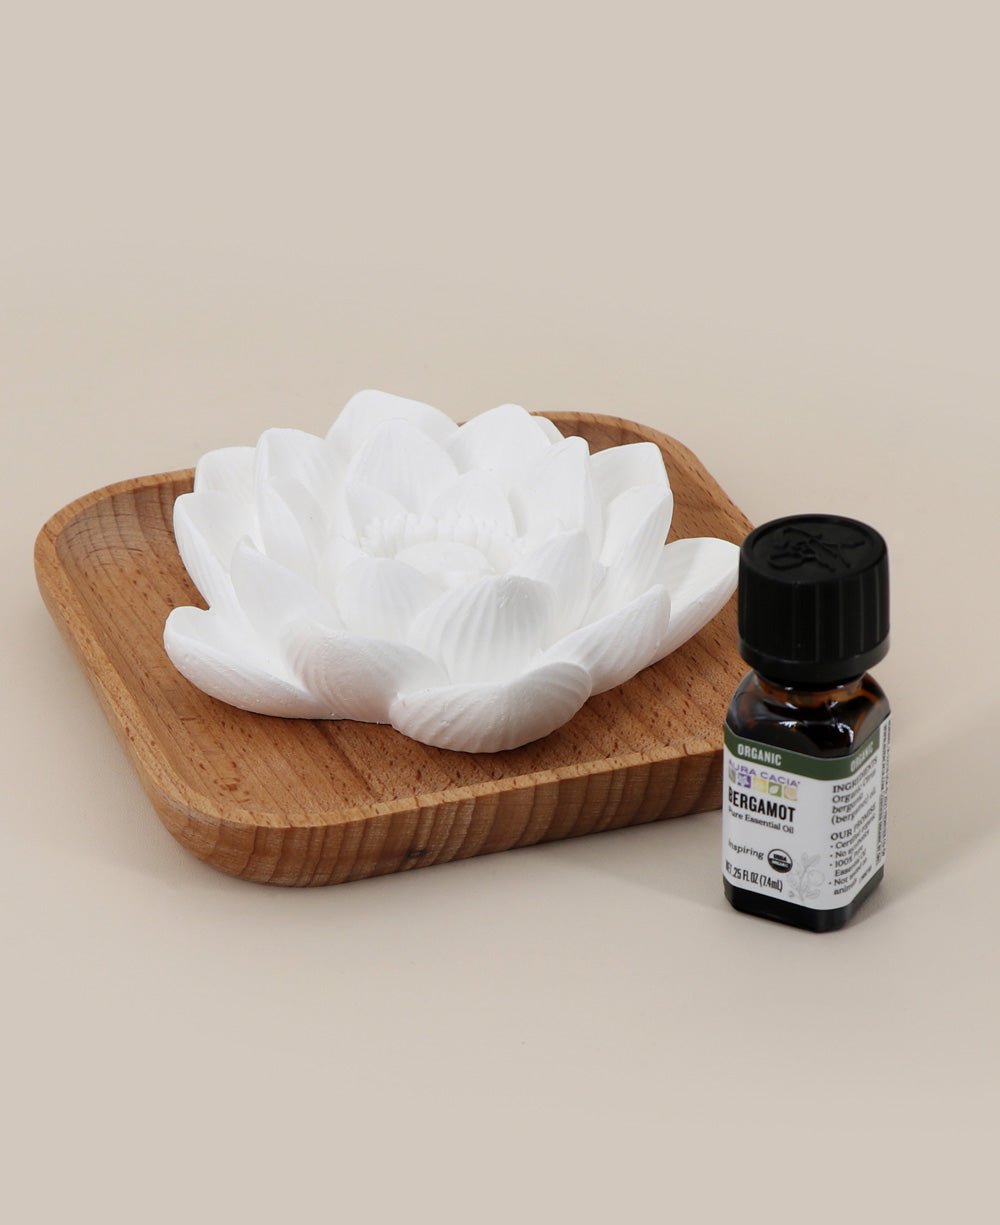 Lotus Diffuser with Organic Bergamot Essential Oil Set - Candle & Oil Warmers